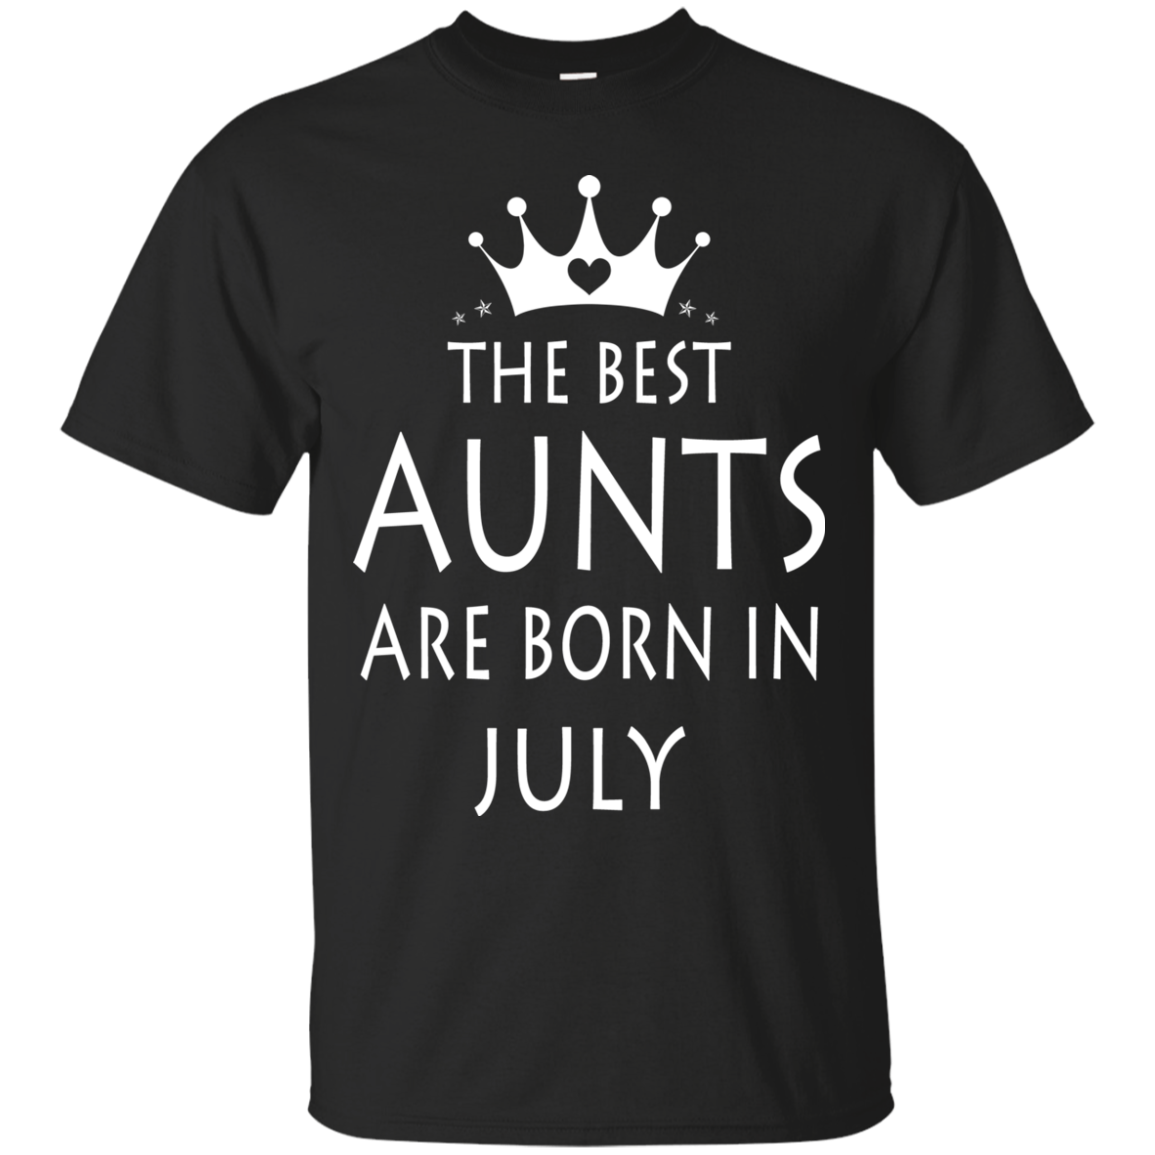 The best Aunts are born in July shirt, tank, sweater